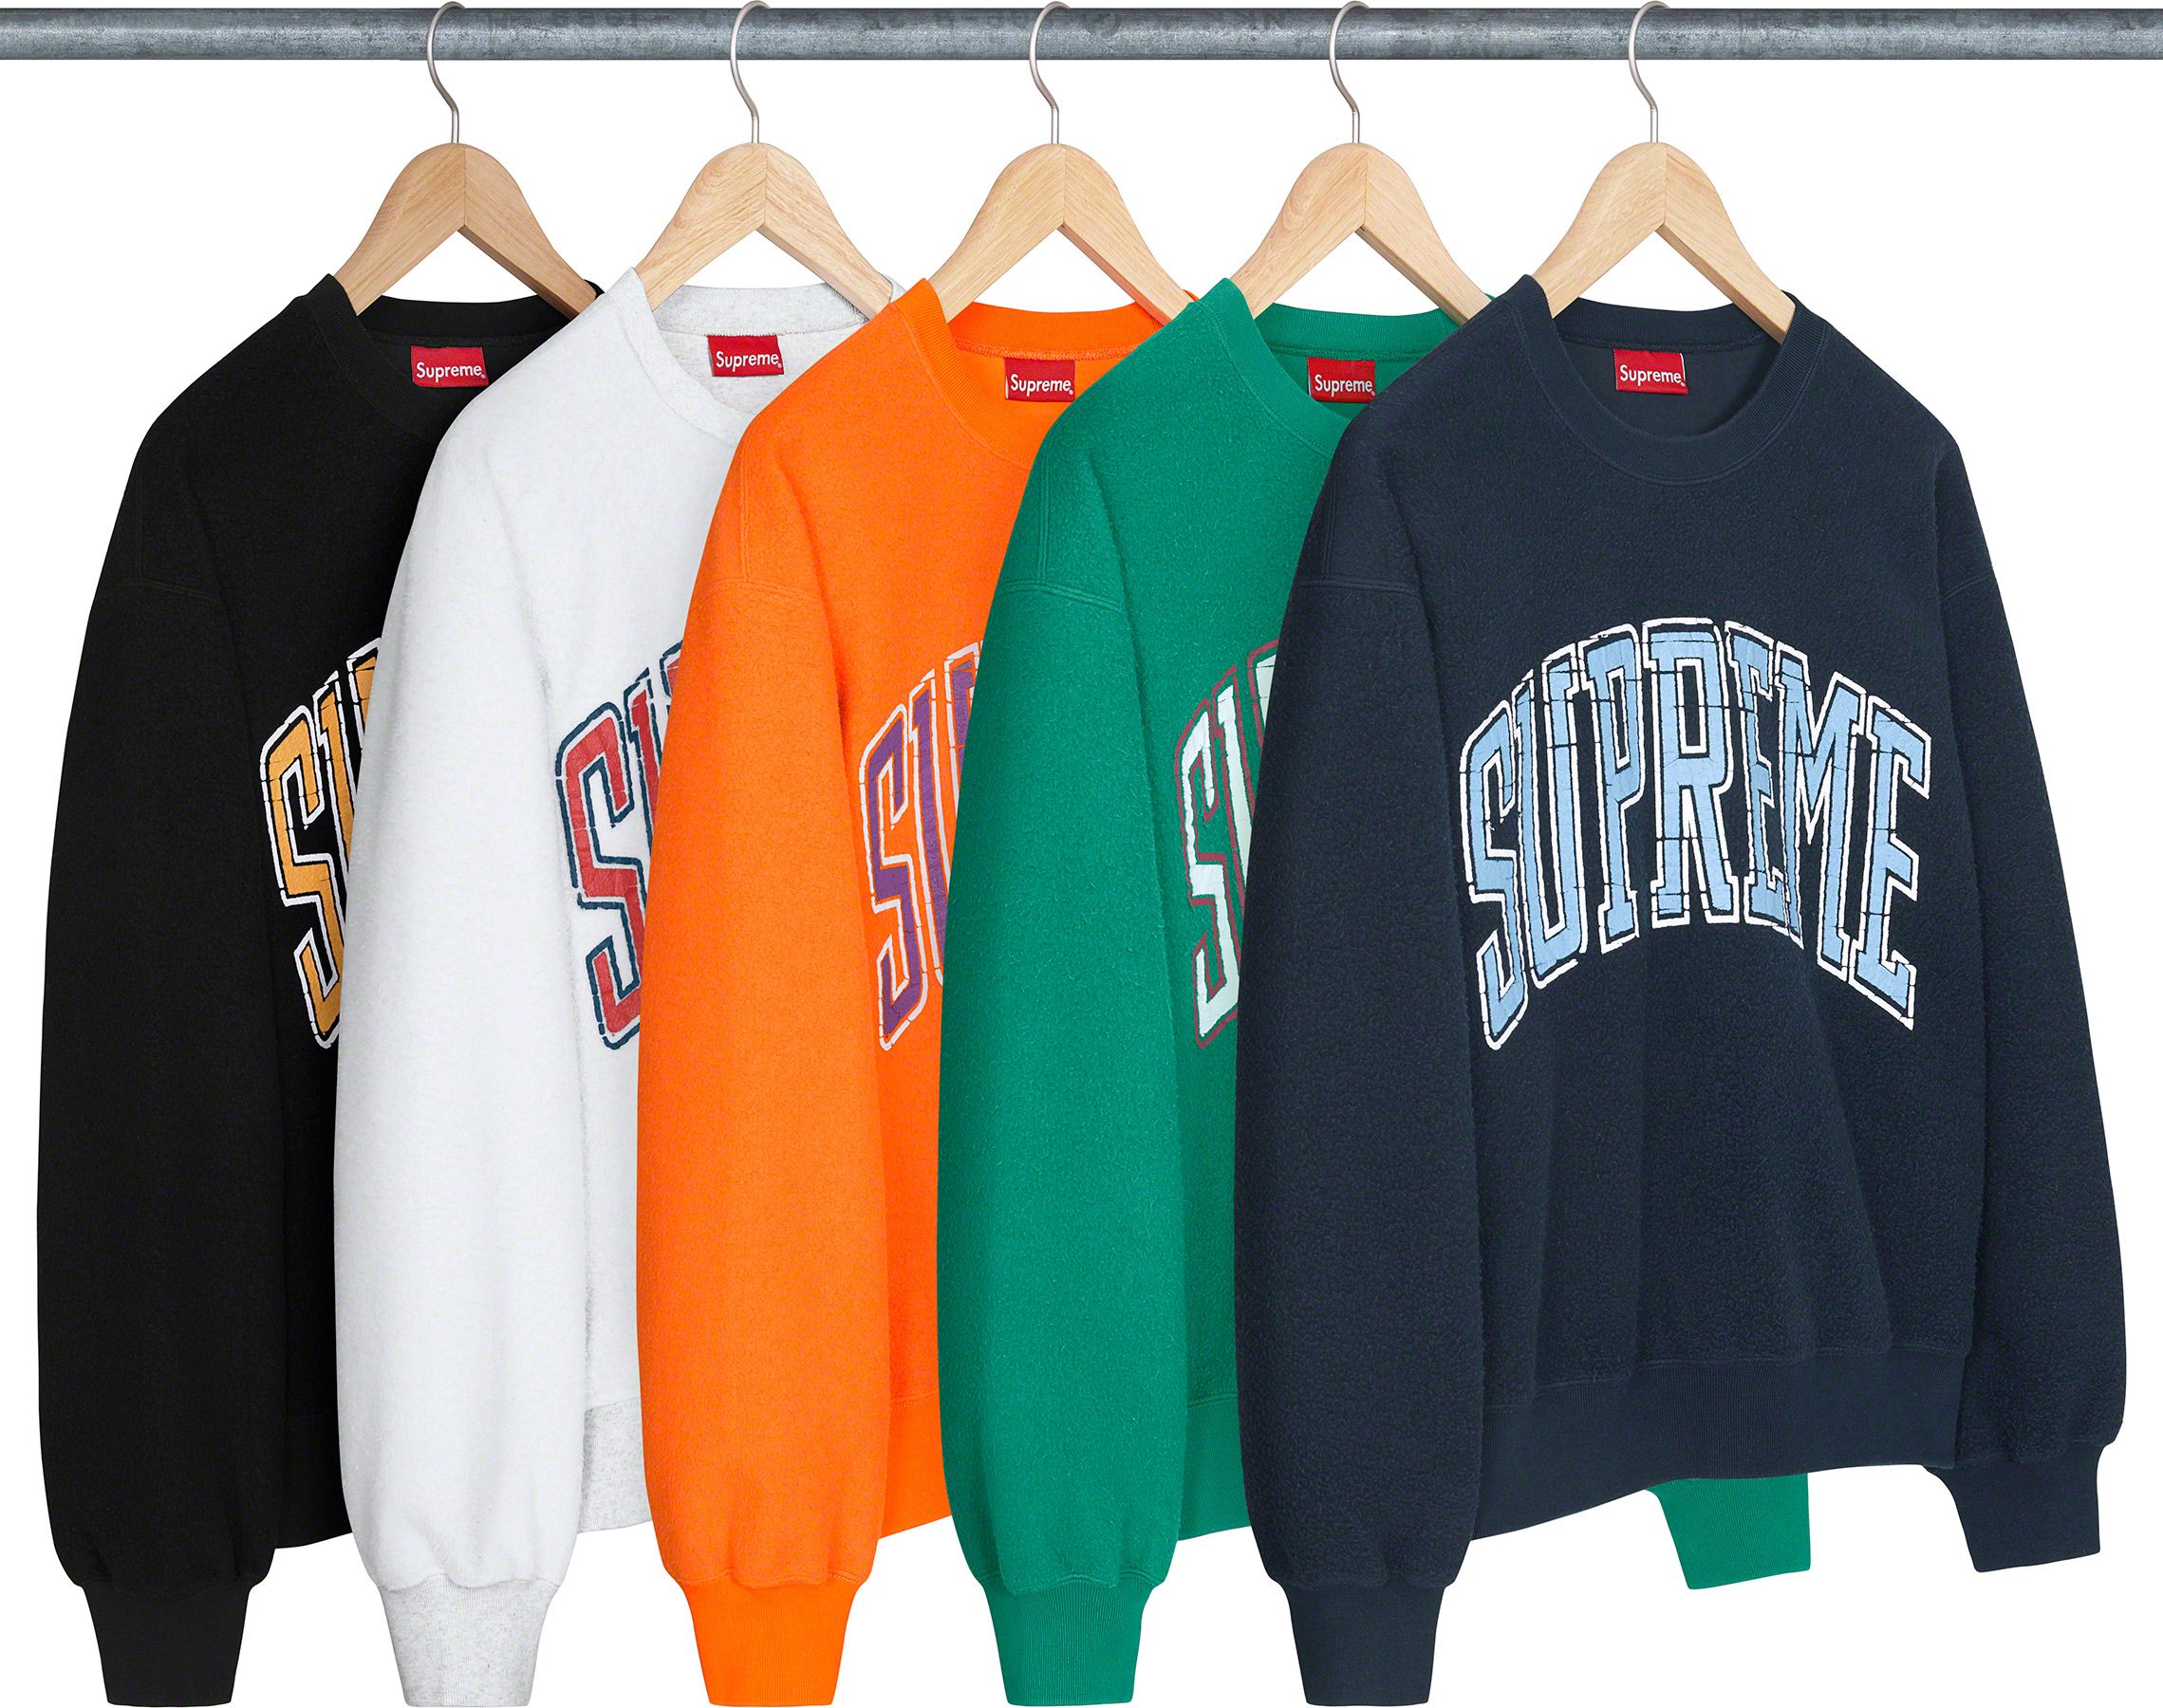 Inside Out Crewneck - Fall/Winter 2023 Preview – Supreme